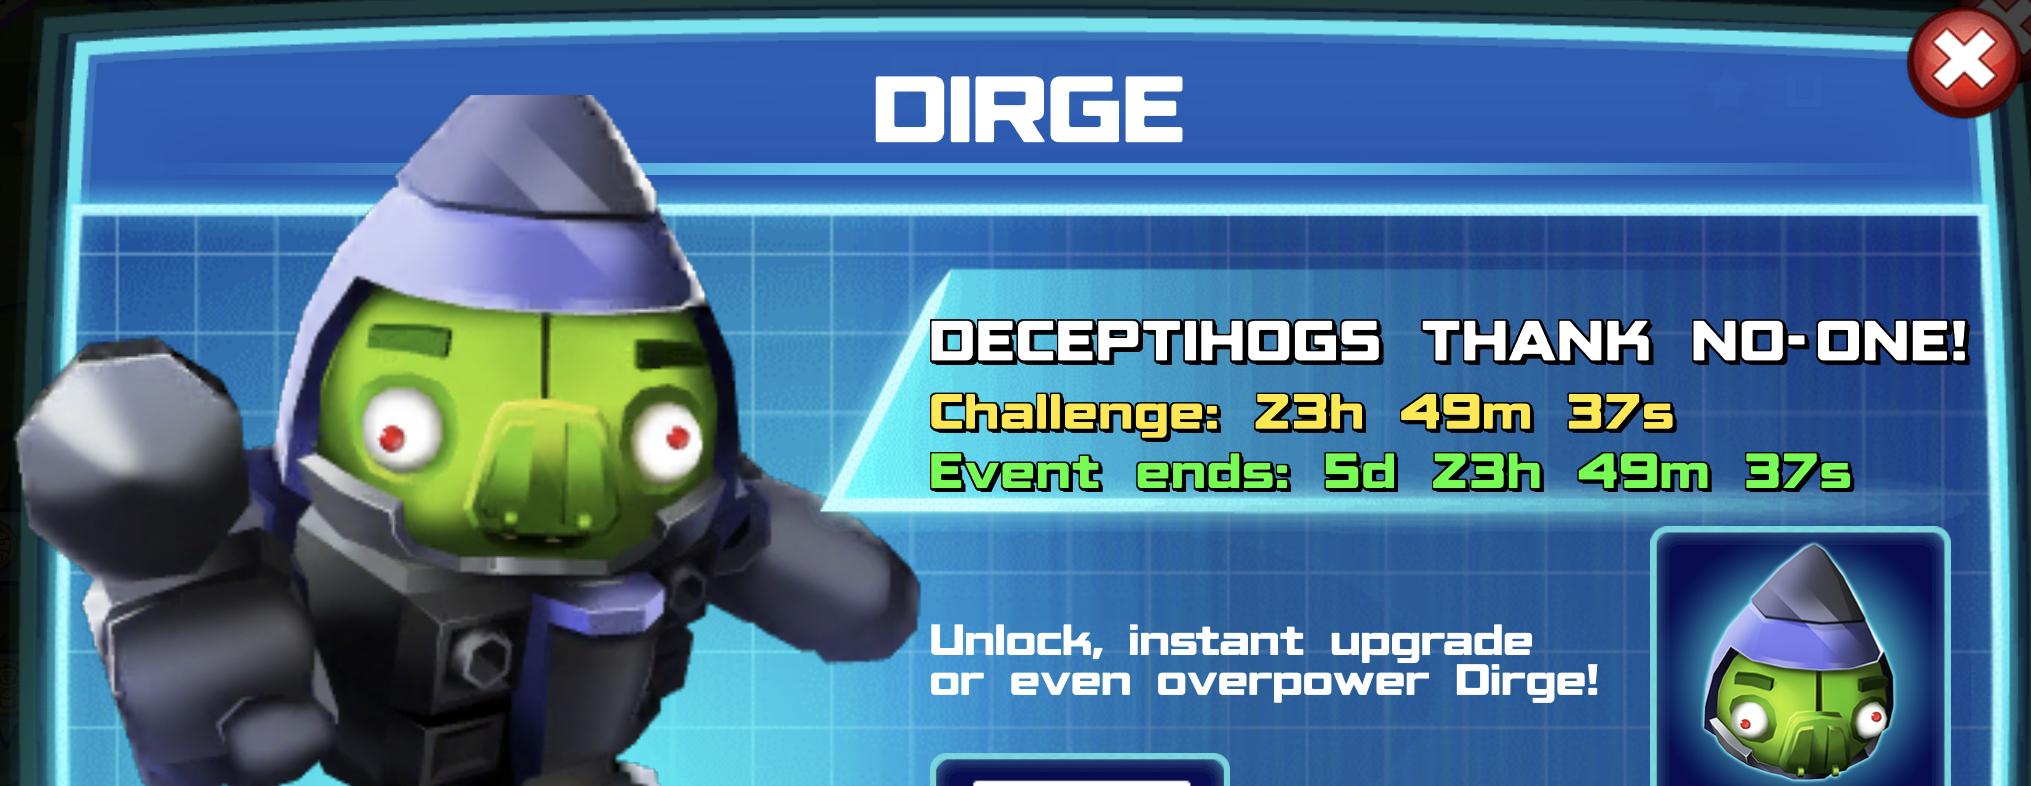 The event banner for Dirge